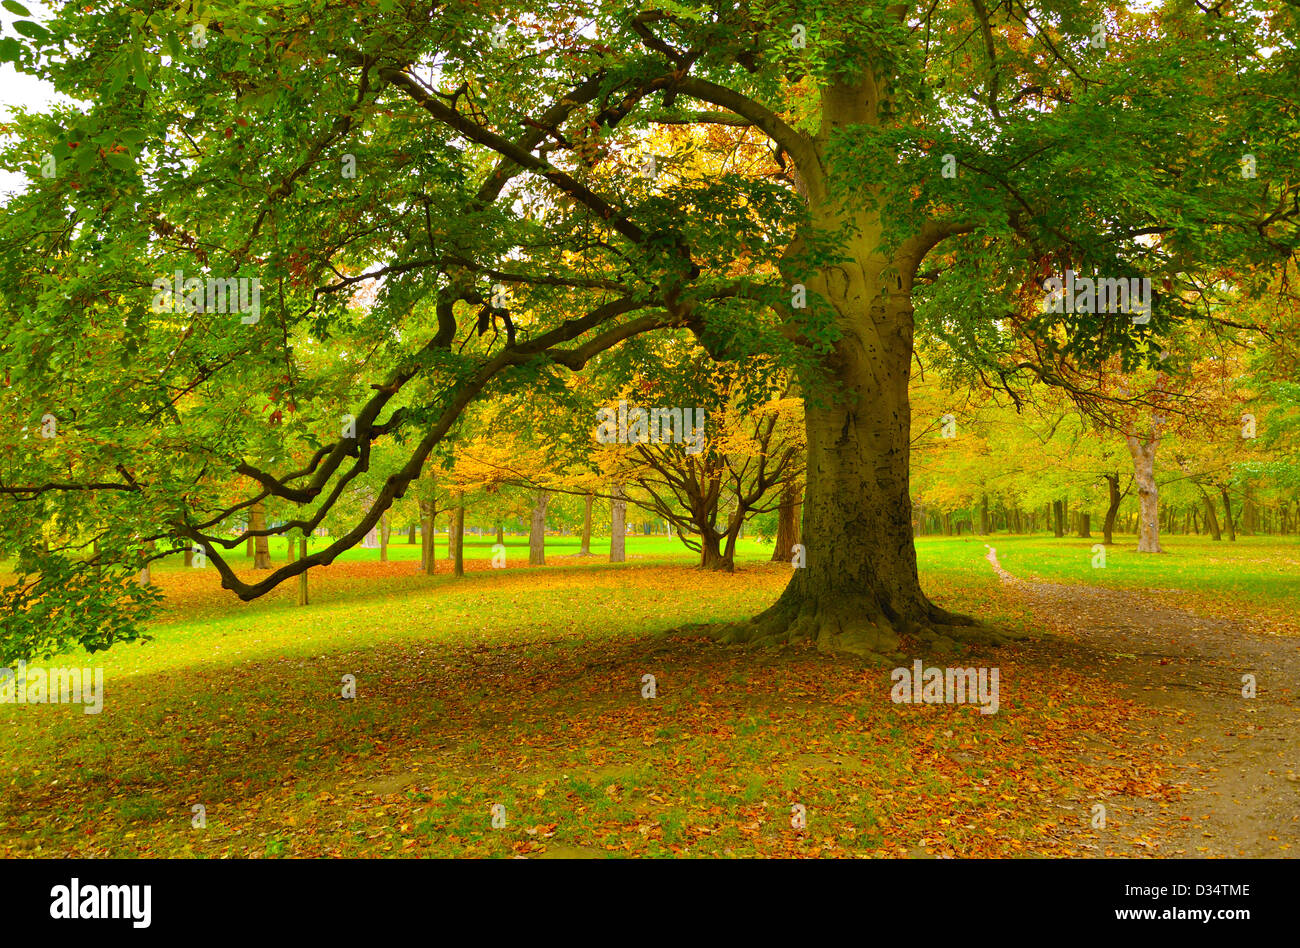 Big tree in the park in Autumn Stock Photo